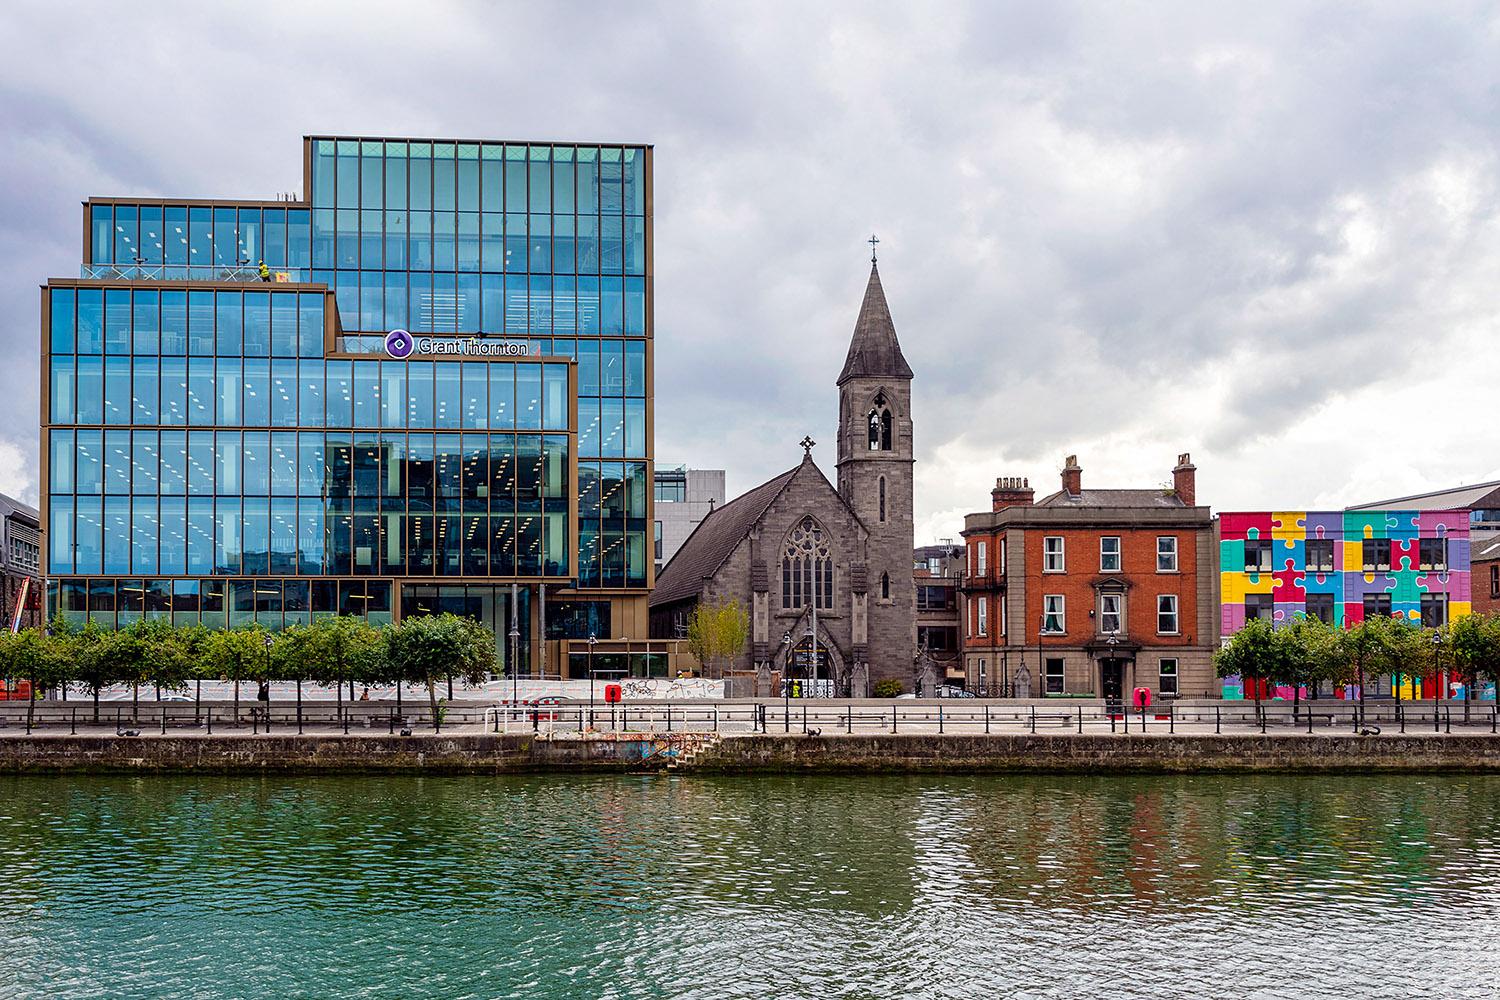 This view across the river Liffey reveals many architectural styles